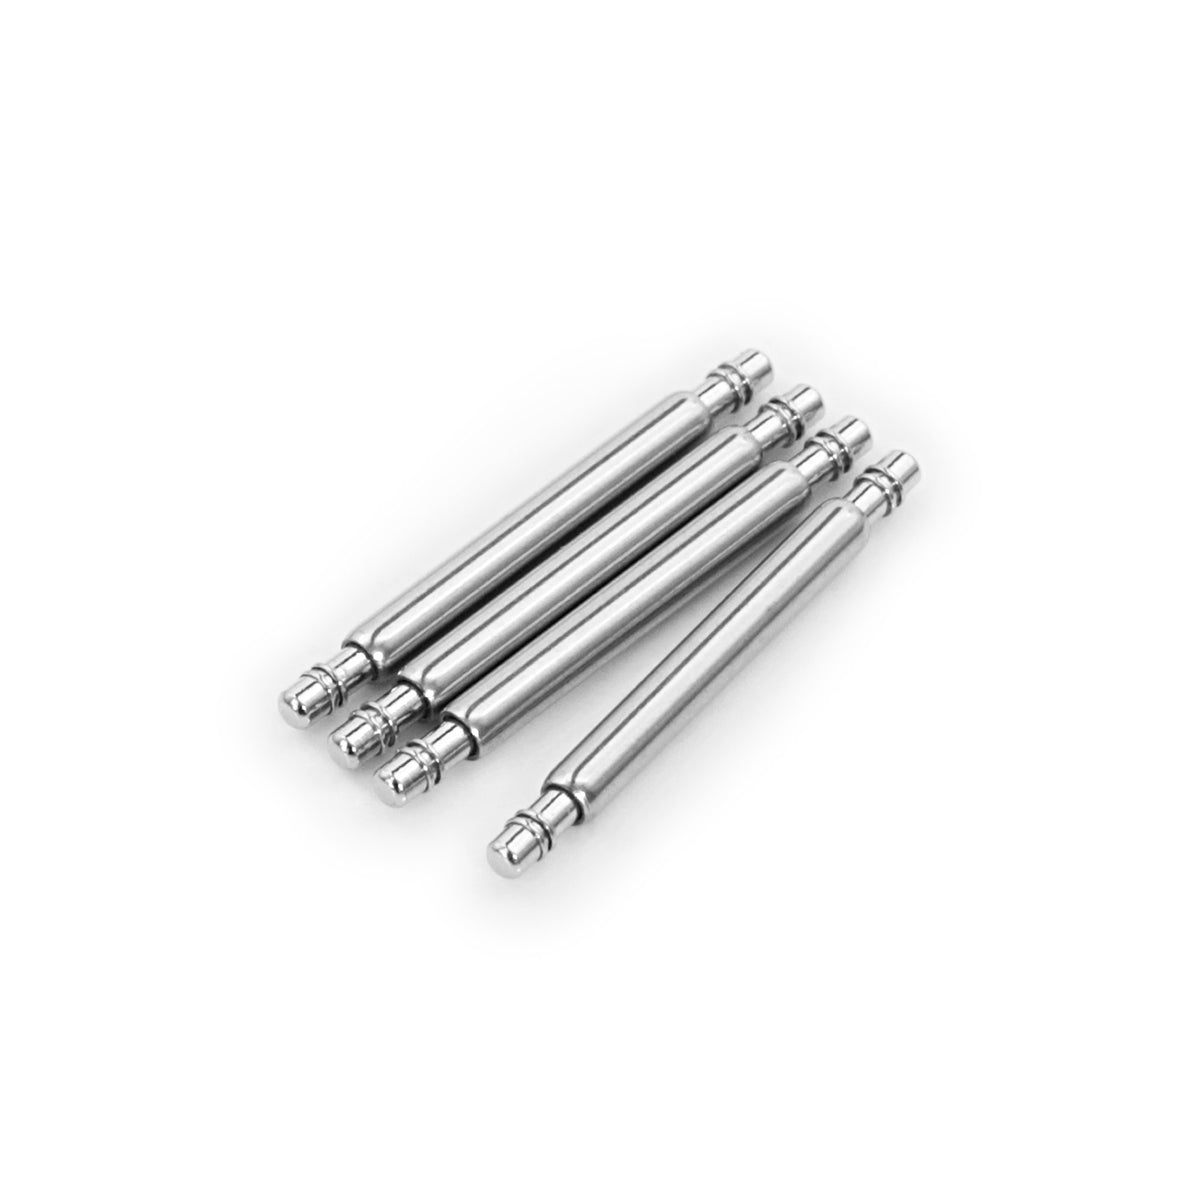 Garmin Fenix 6 Generic Spring Bars, Tip 1.6mm Spring Bars (4 pieces per pack)  Strapcode Watch Bands